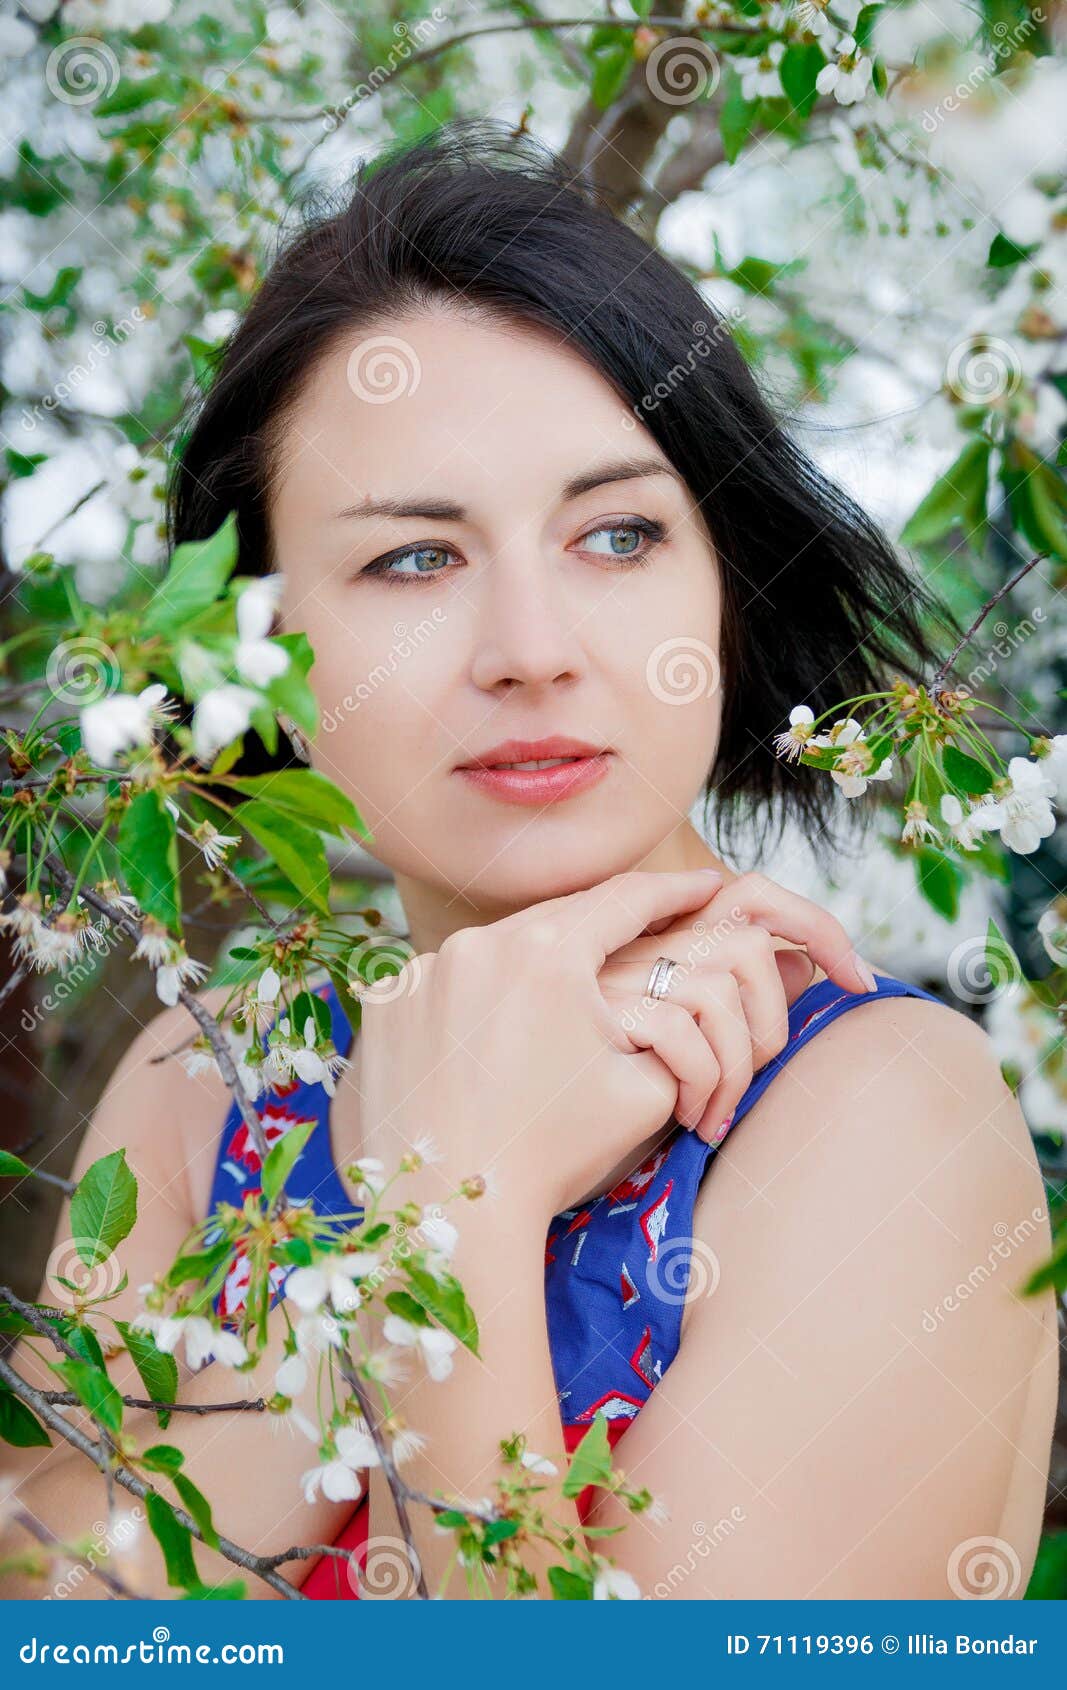 Girl among the Blooming Trees Stock Photo - Image of outdoor, adult ...